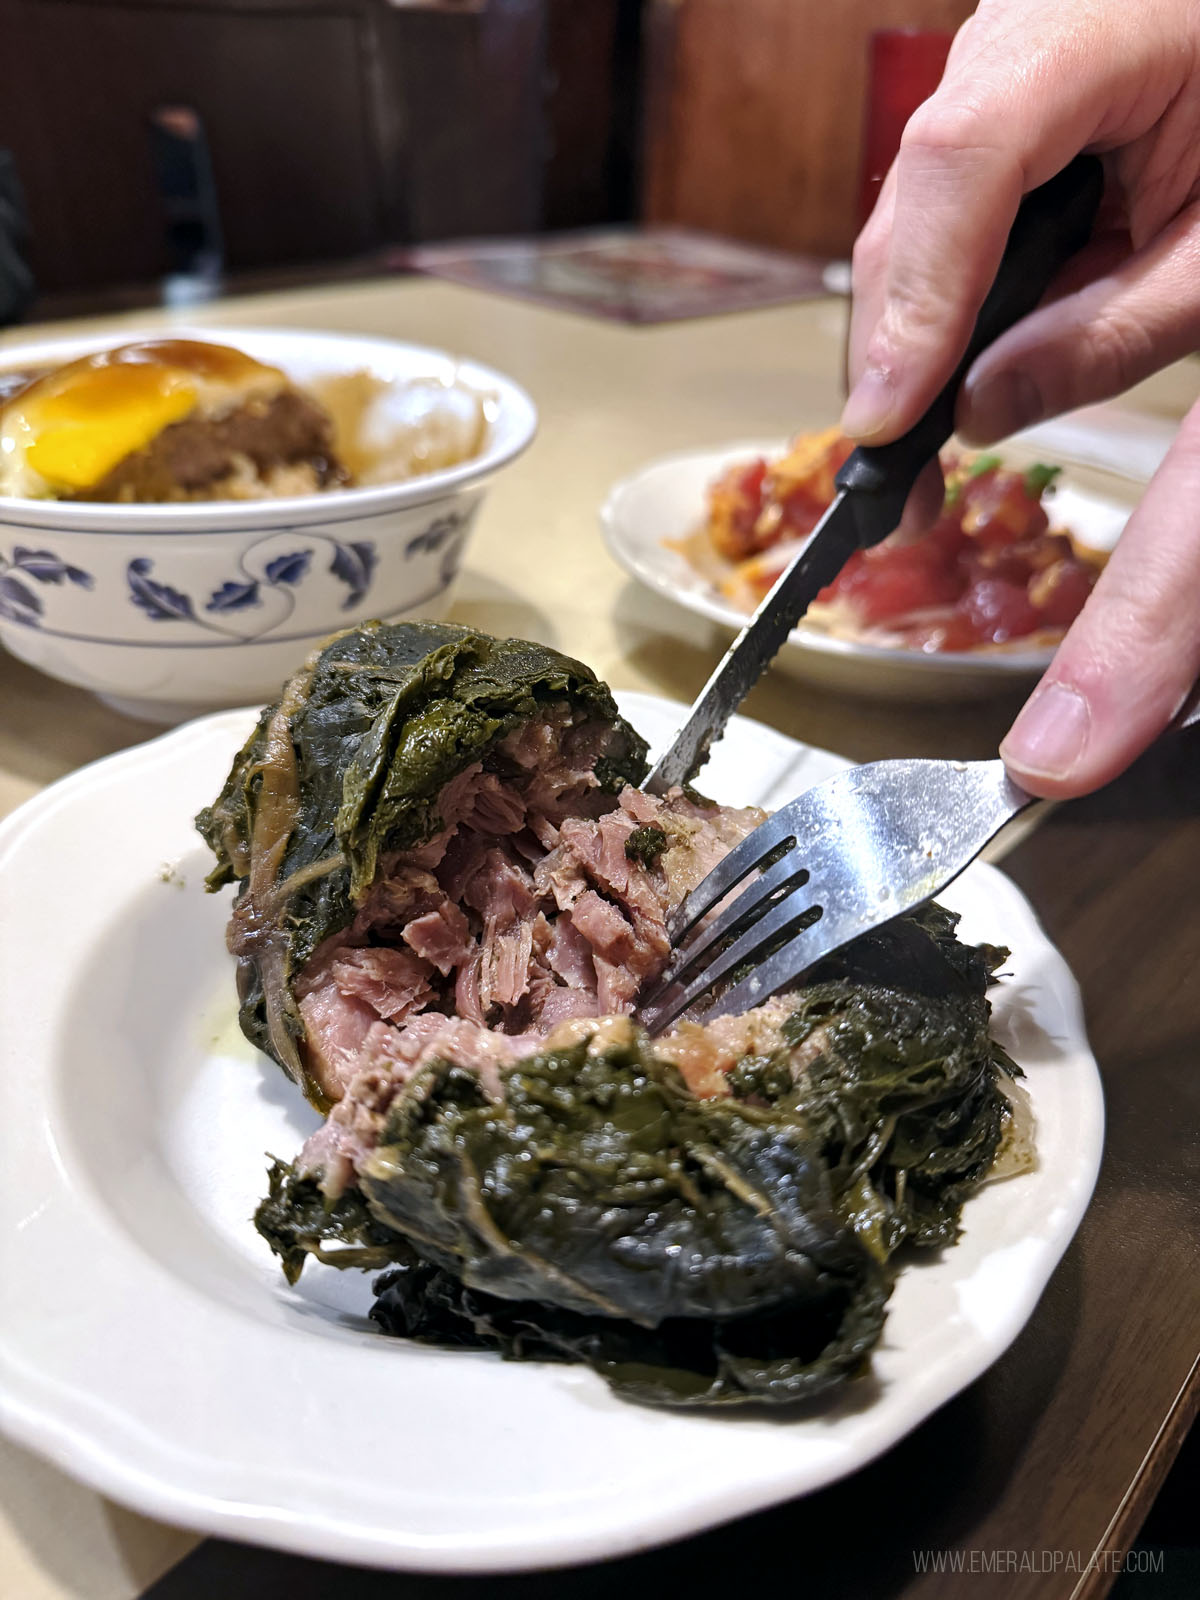 laulau pork from one of the best places or Hawaiian food in Seattle